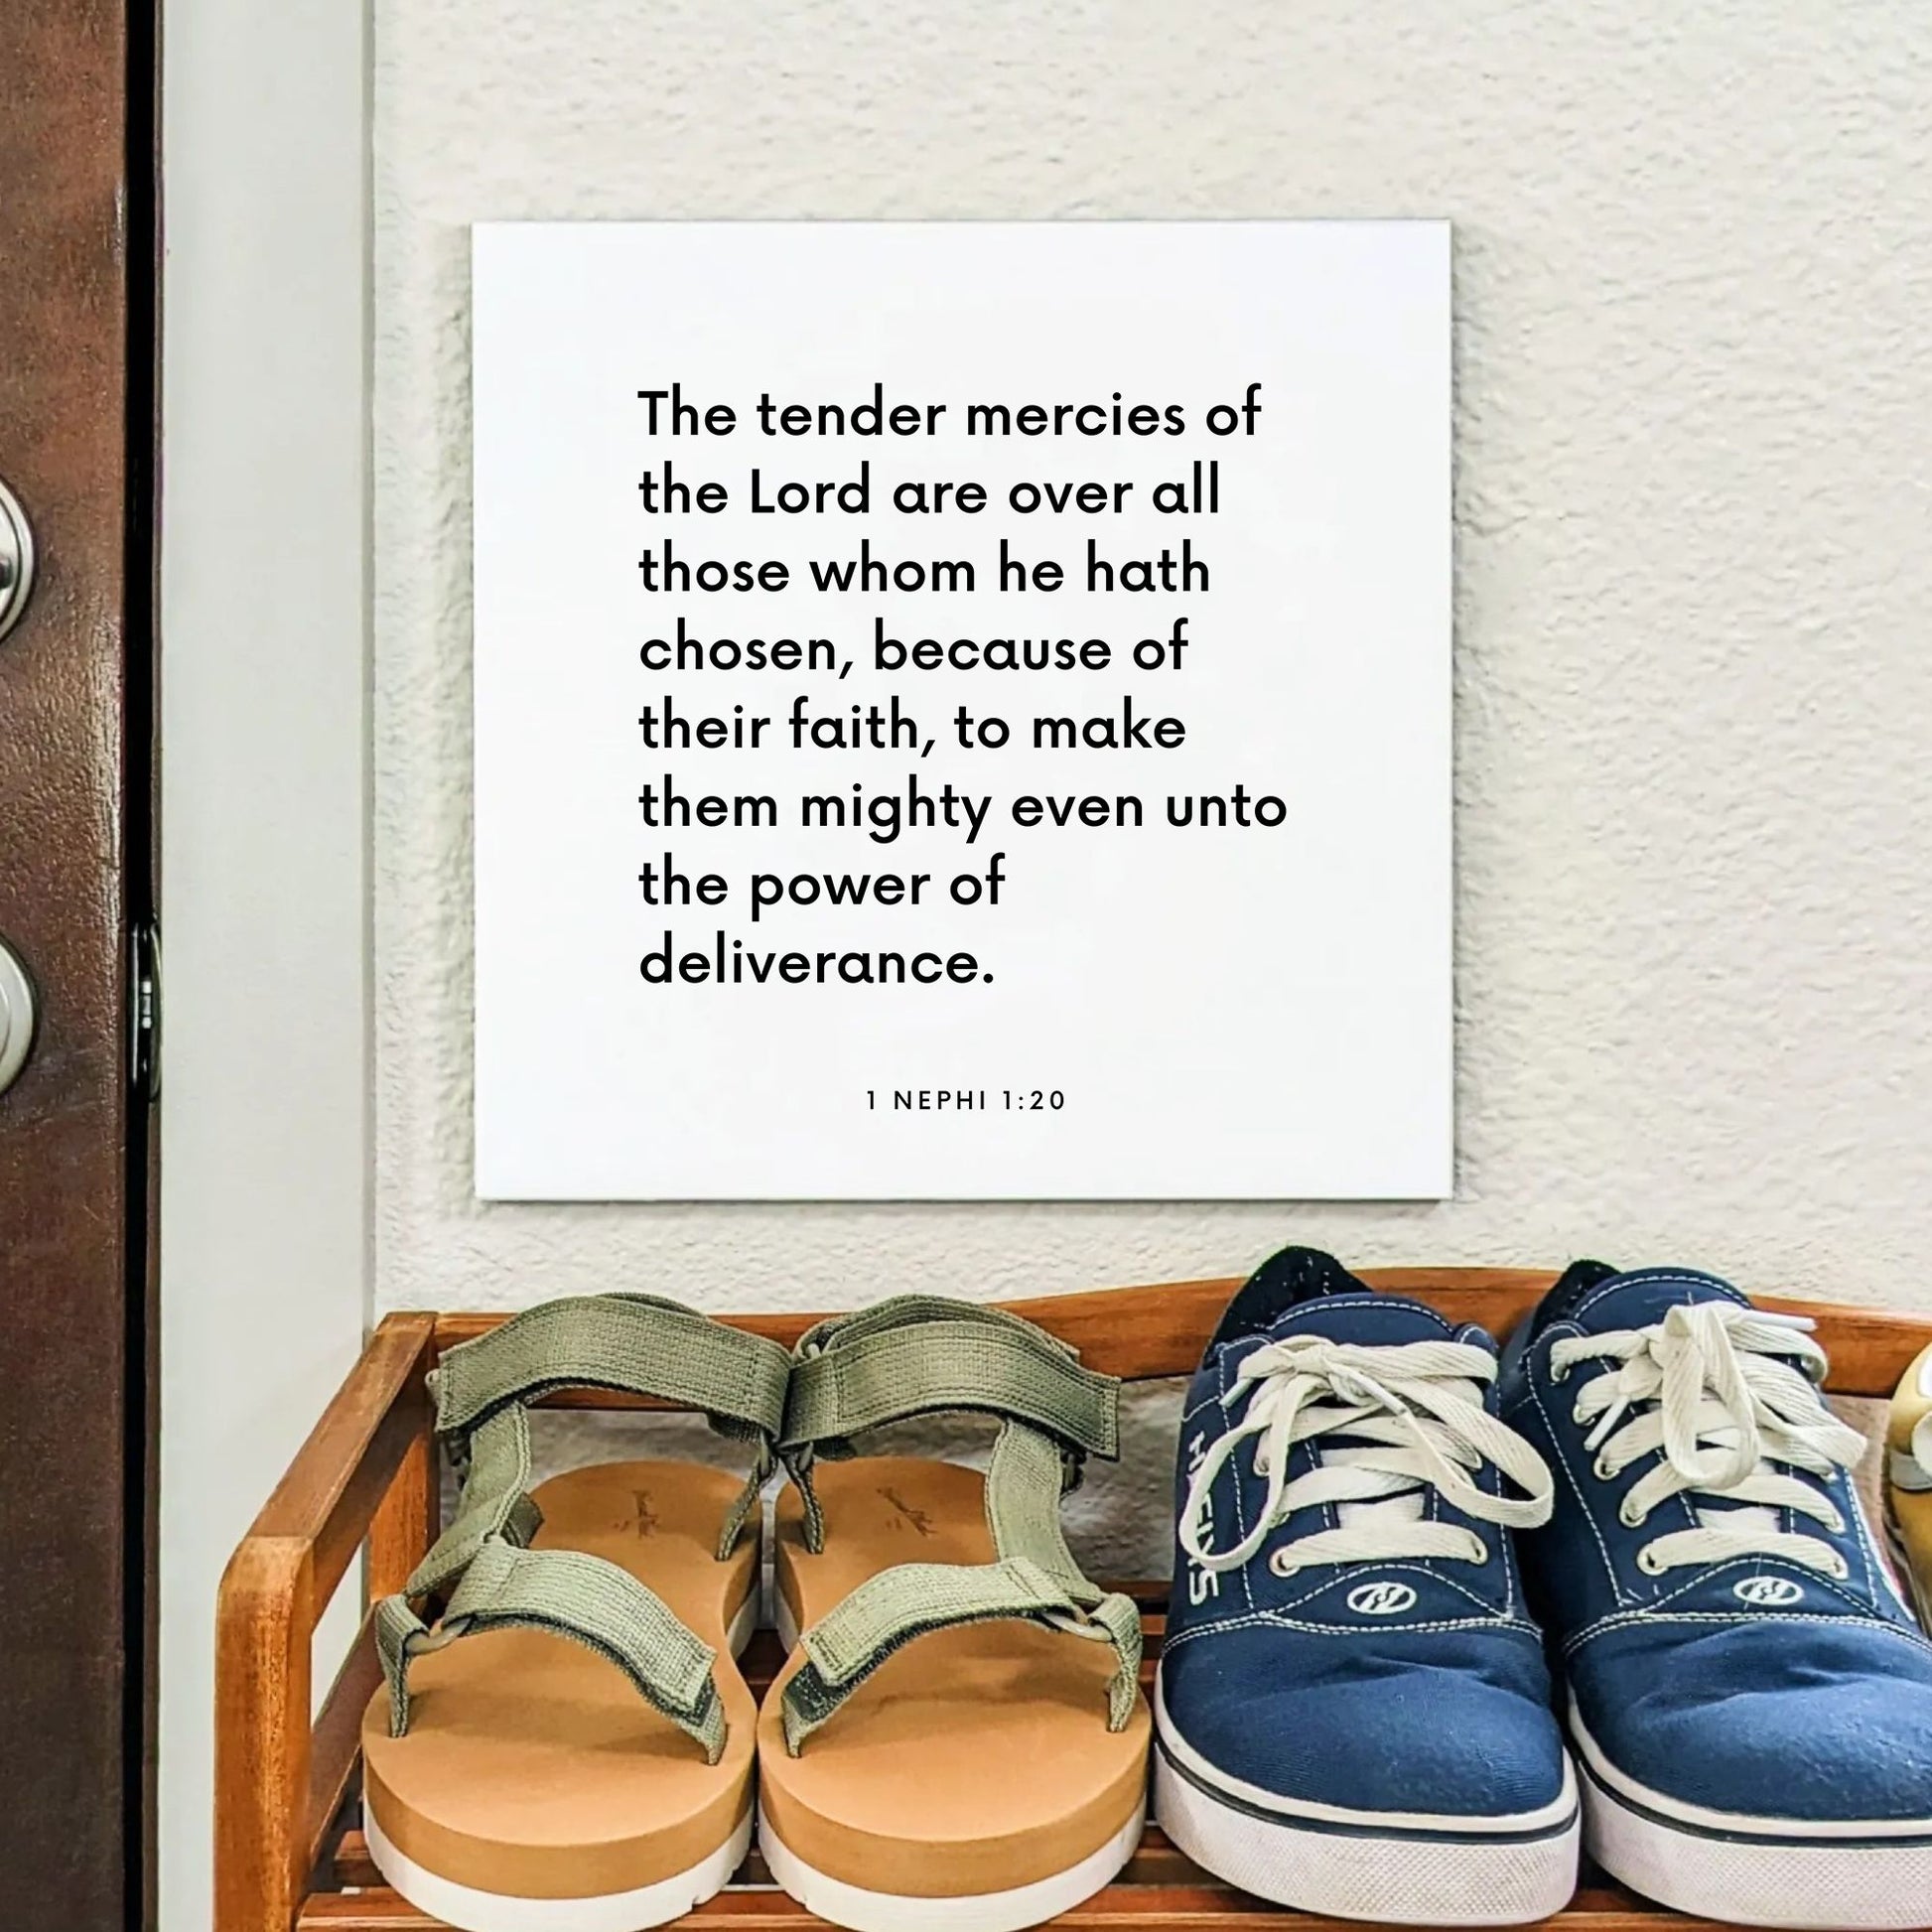 Shoes mouting of the scripture tile for 1 Nephi 1:20 - "The tender mercies of the Lord are over all"